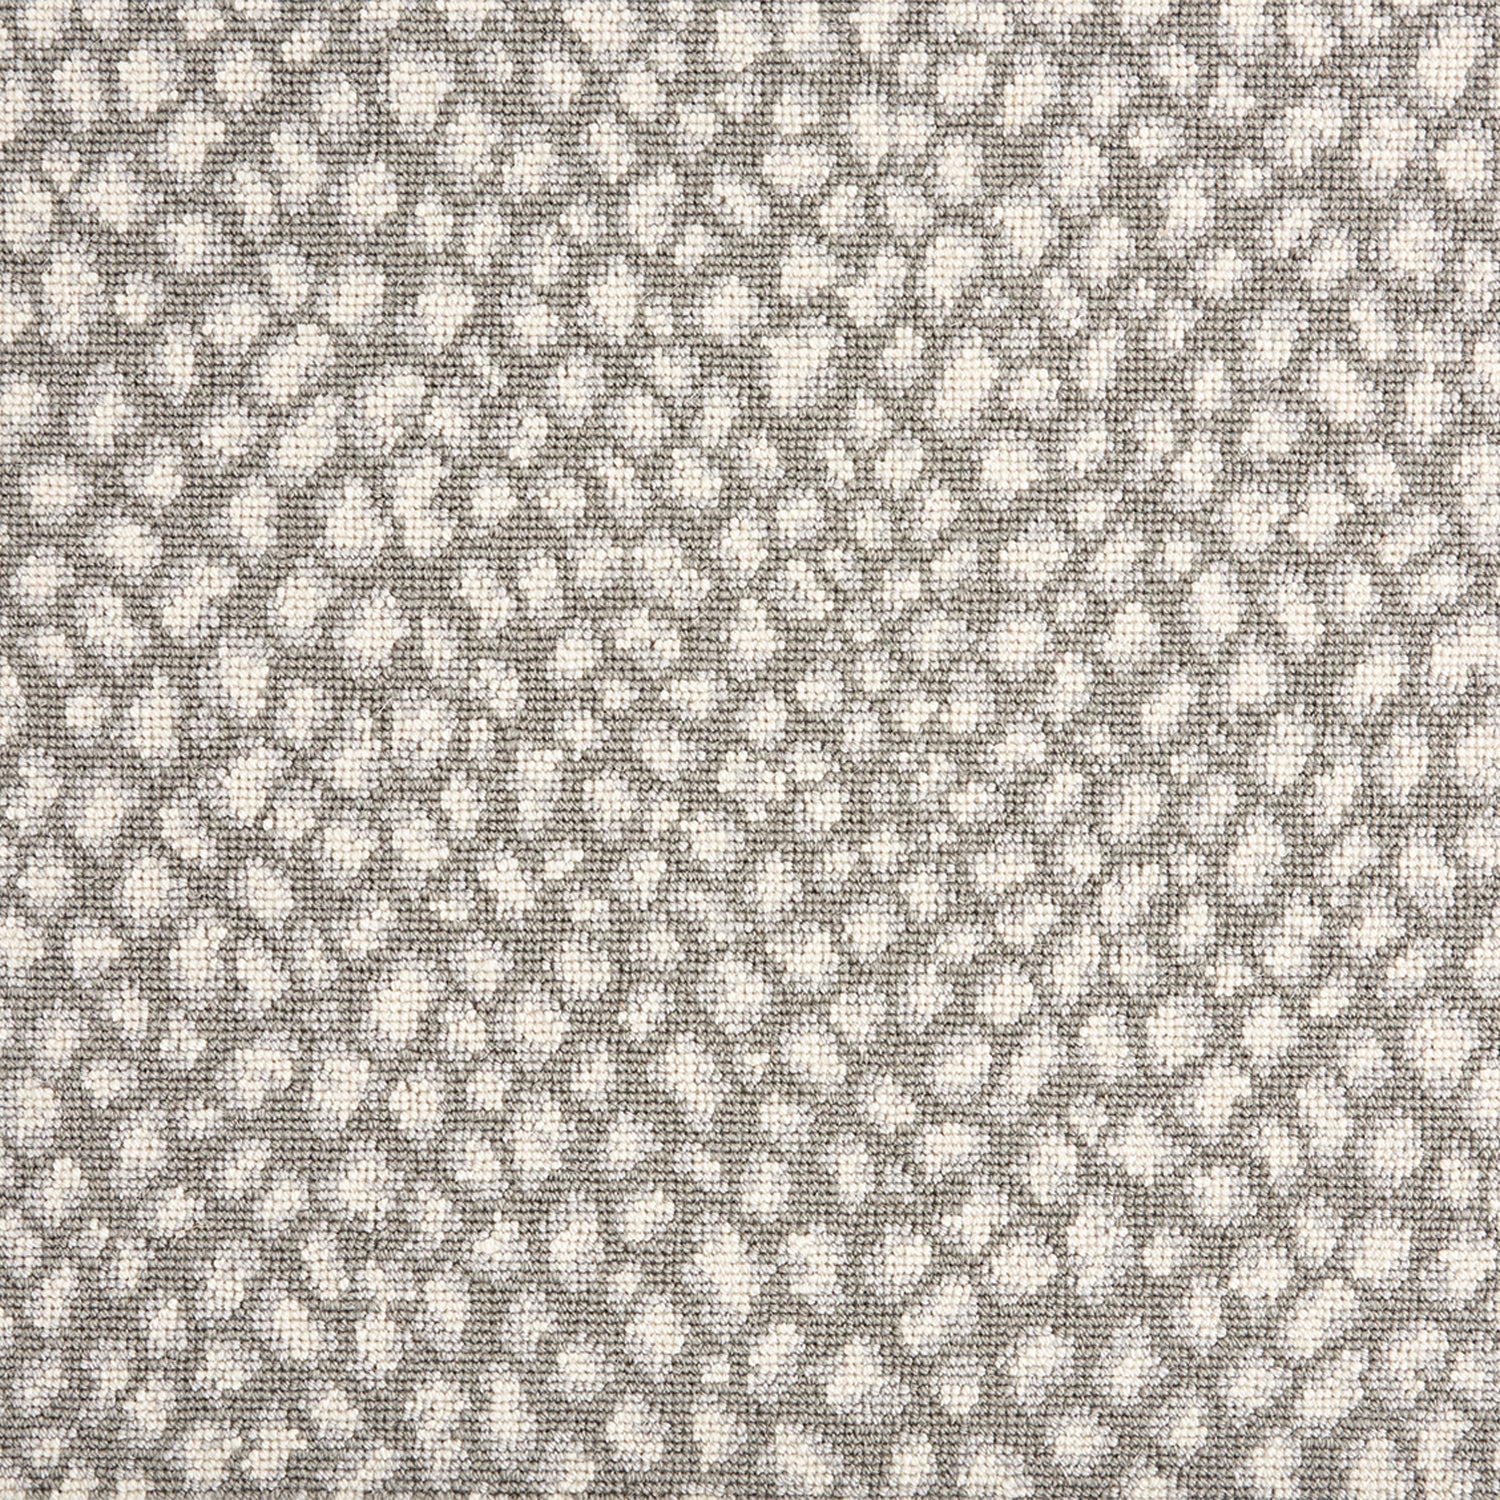 Wool-blend broadloom carpet swatch in a small scale animal print pattern in cream and light gray on a gray field.